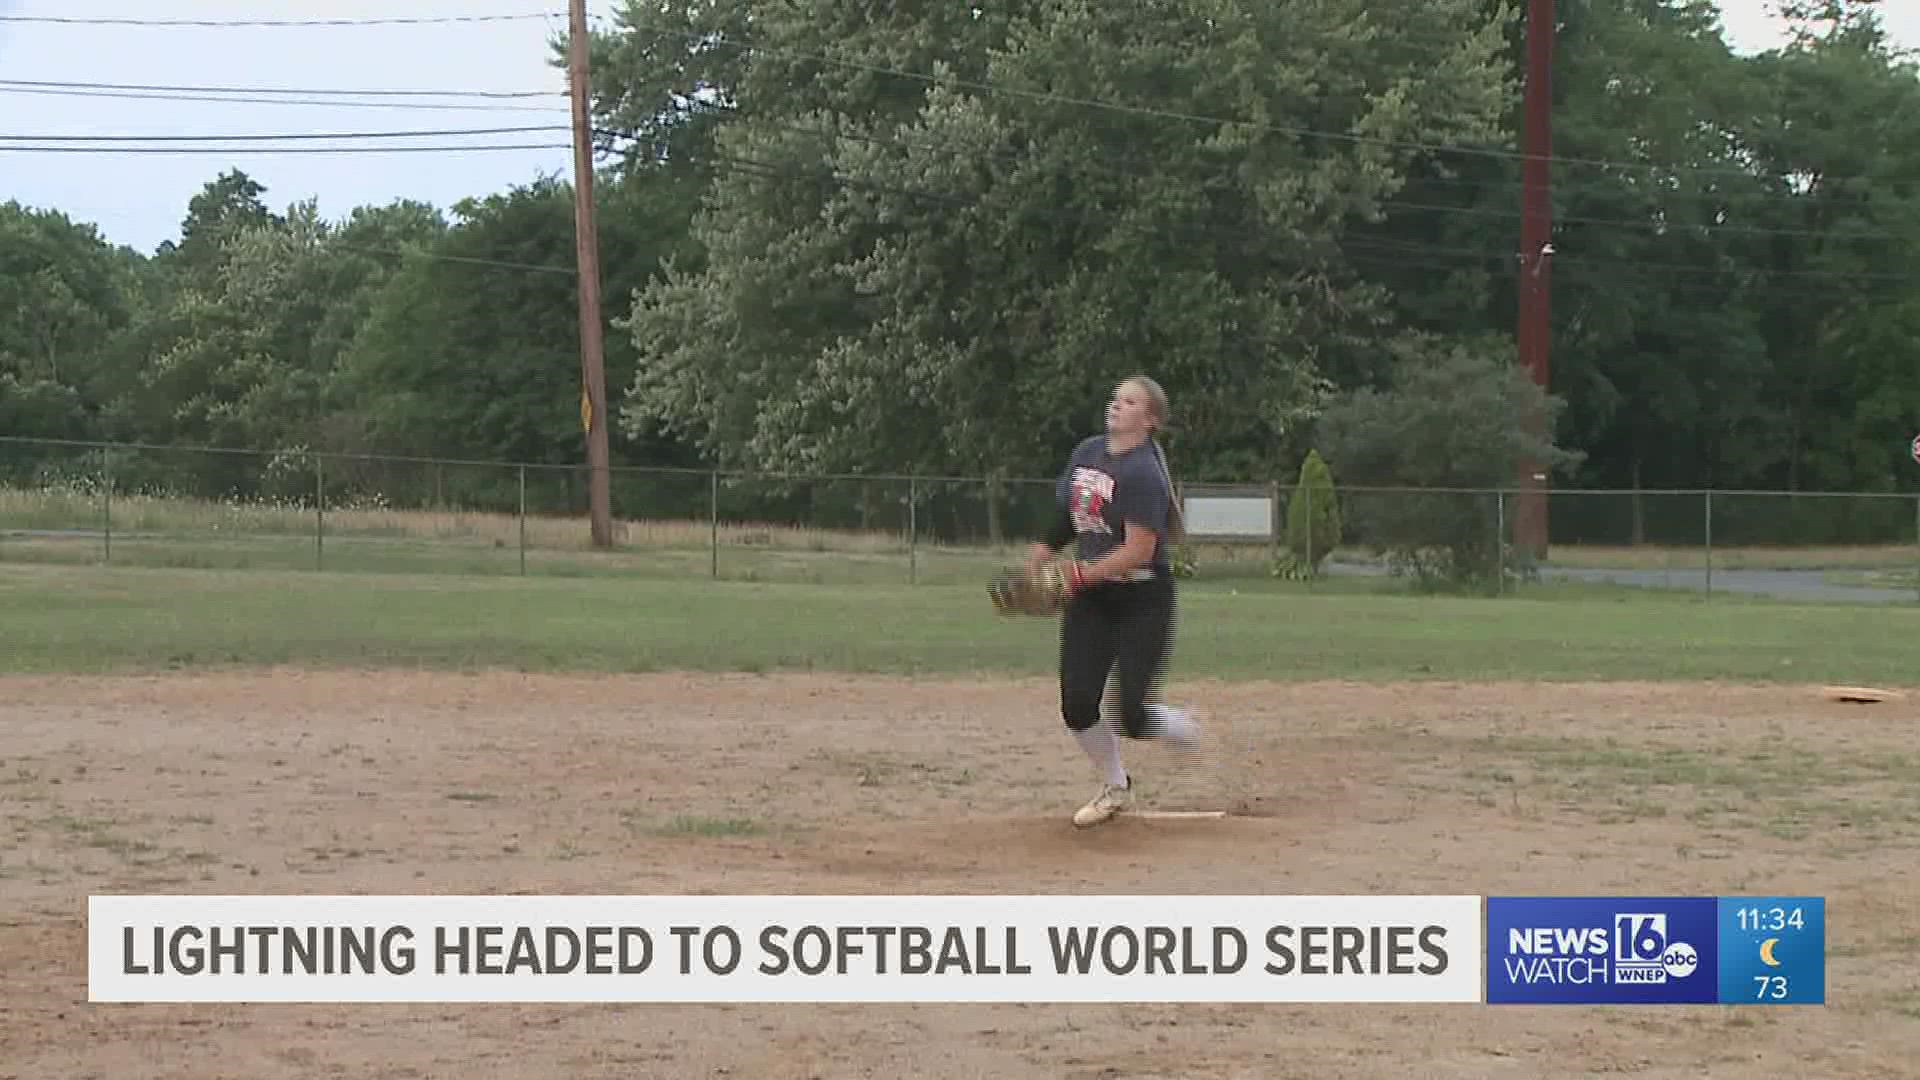 The Lackawanna Lightning leave Friday for the Softball World Series in Buffalo, New York for the double elimination tournament.